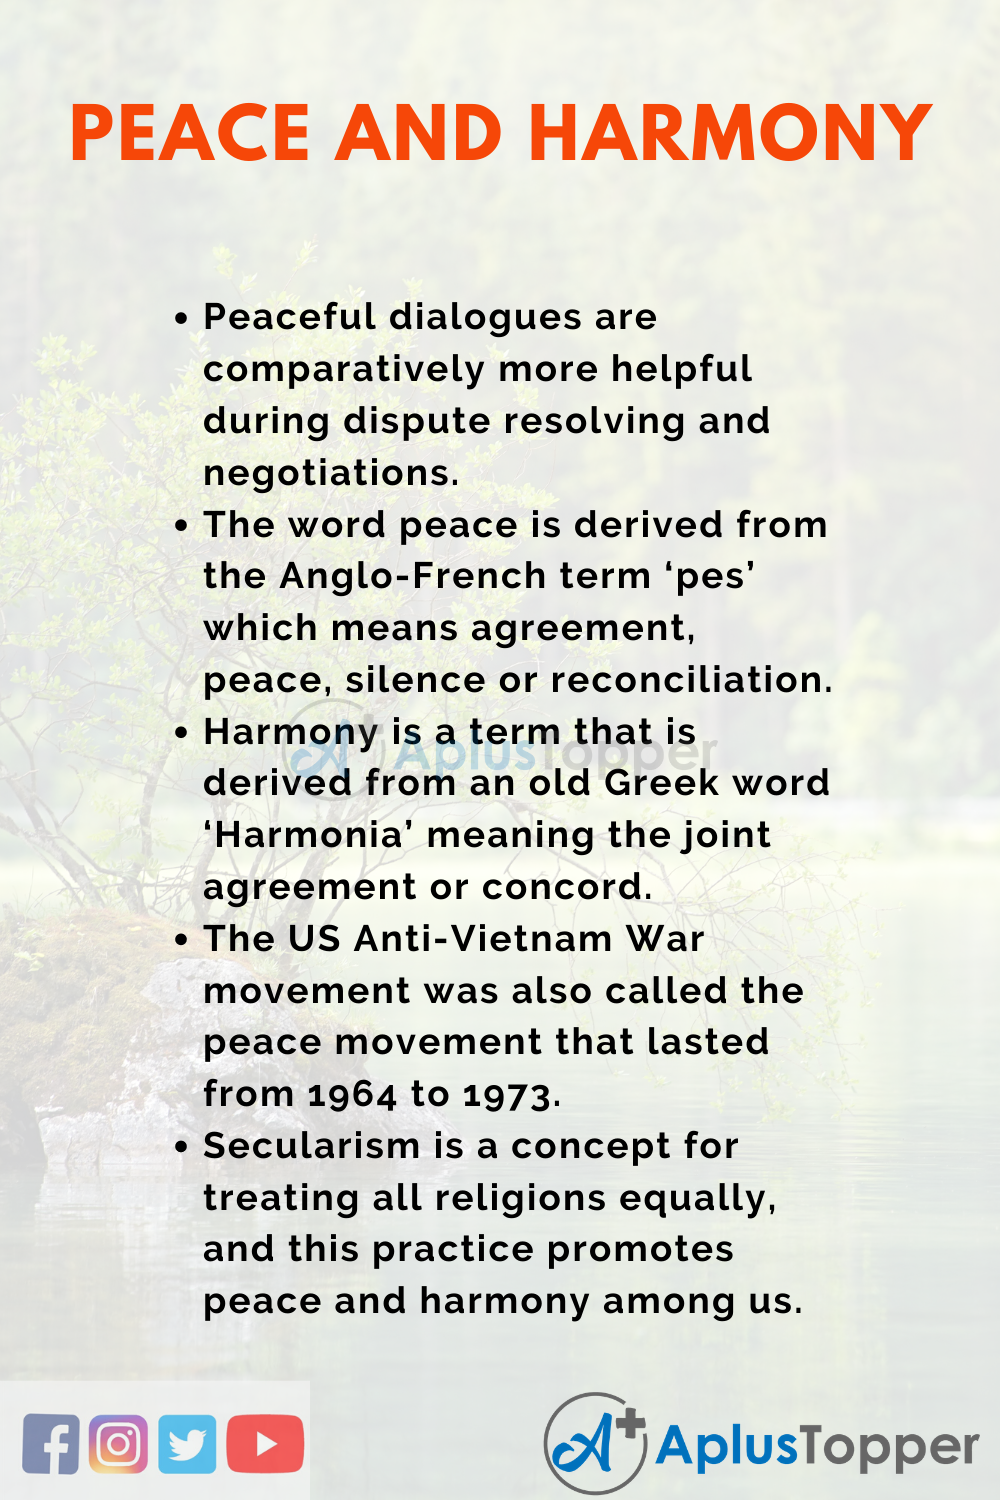 What is the importance of peace and harmony in society?